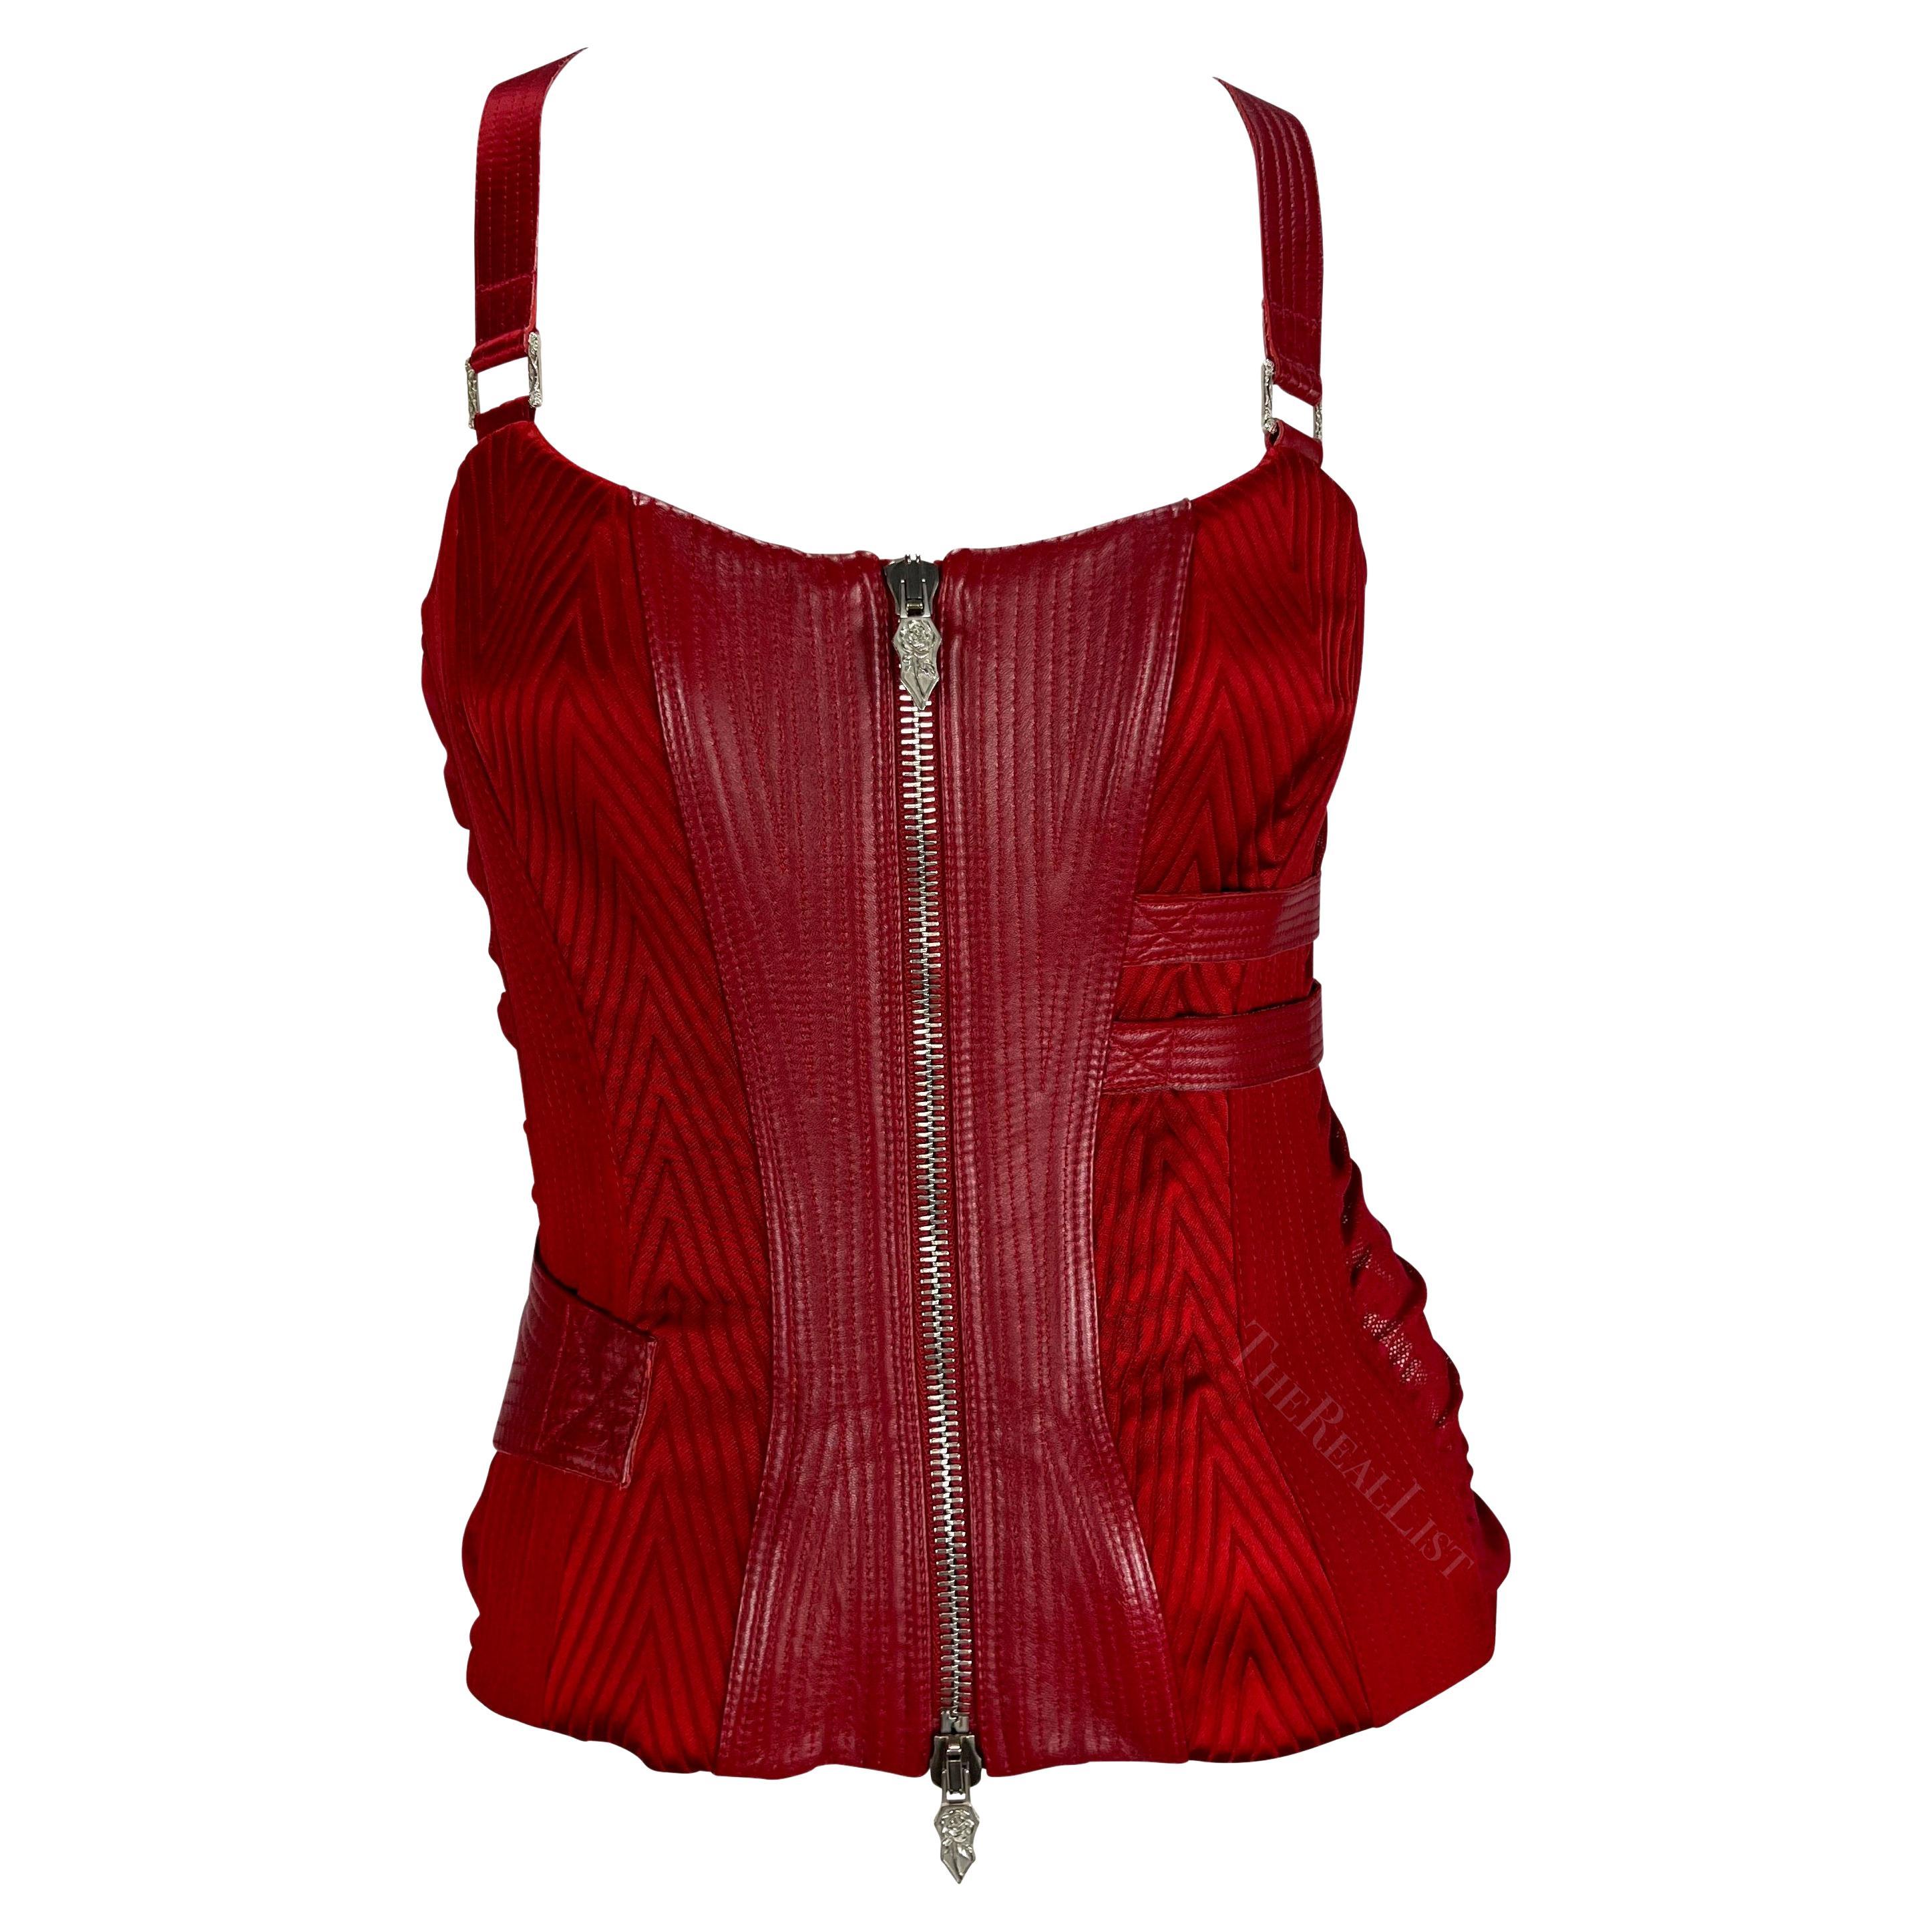 F/W 2003 Versace by Donatella Versace Red Quilted Leather Runway Corset Top